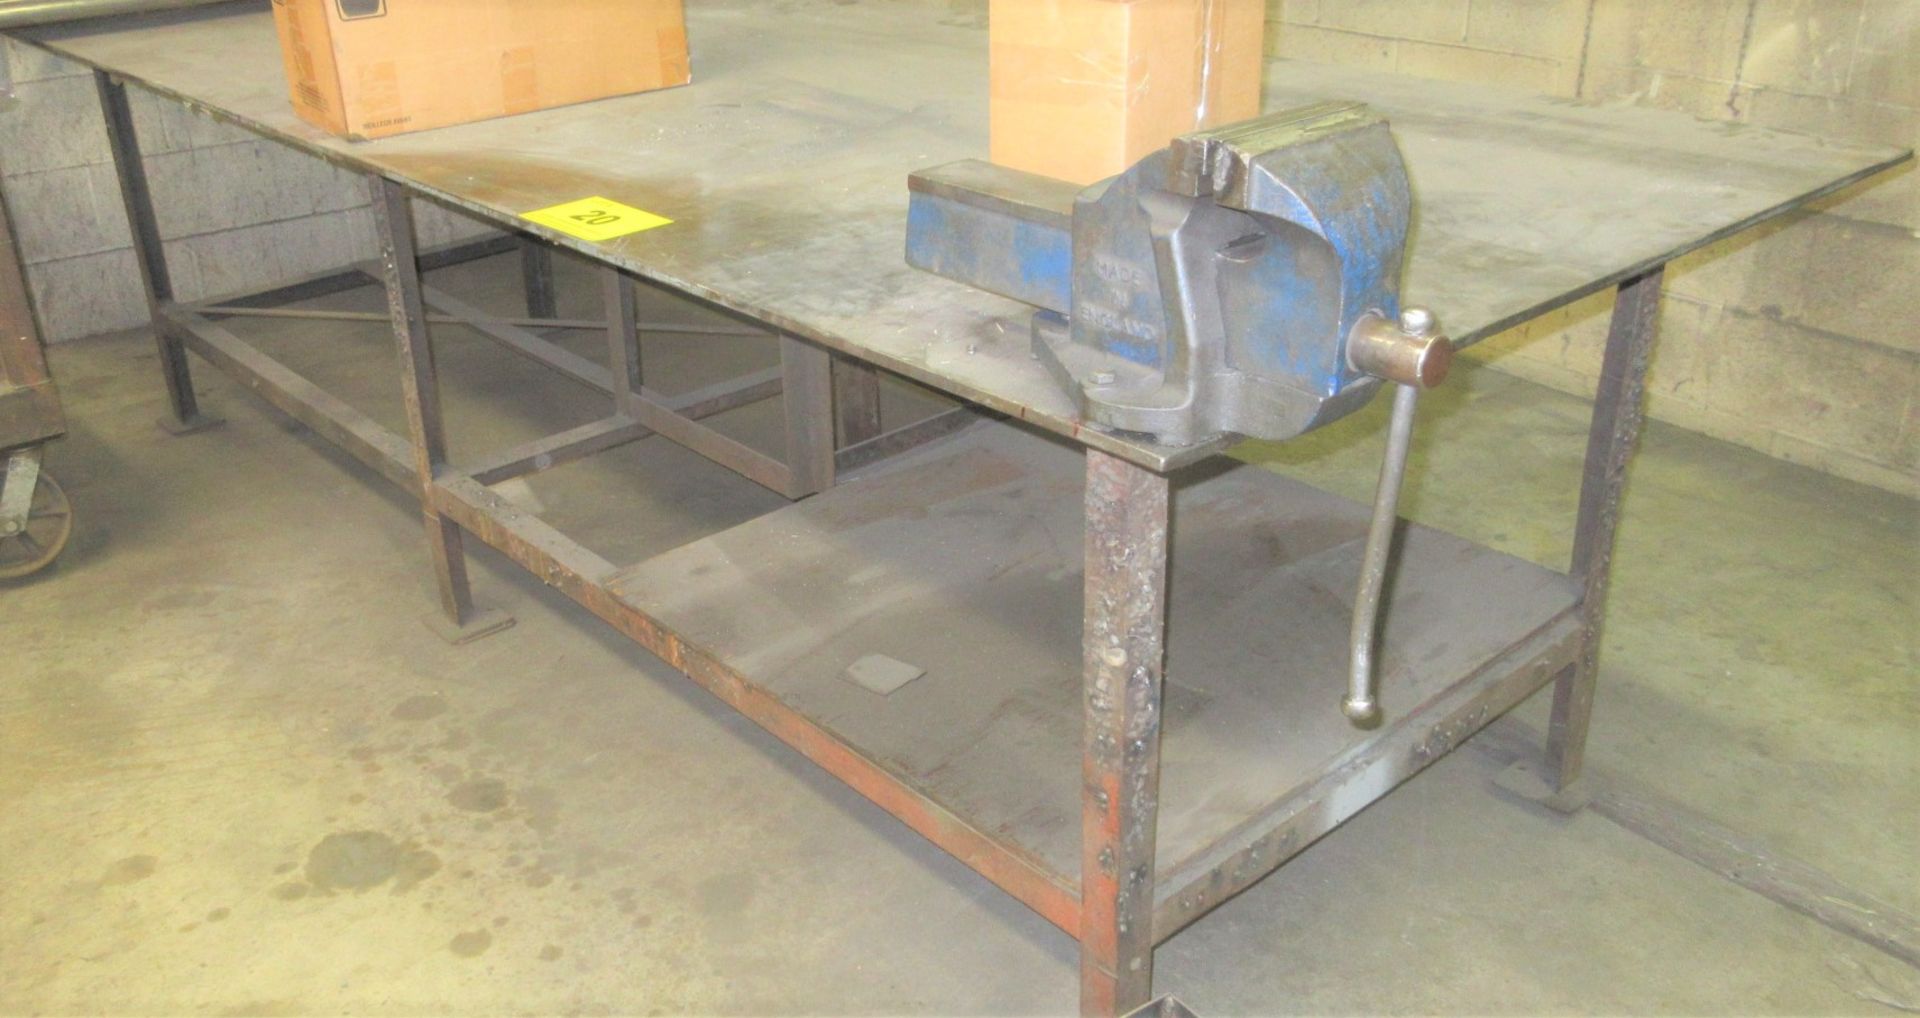 APPROX. 10'L X 4'W X 1/2" THICK TOP WELDING TABLE W/ 6" VISE (NO CONTENTS)